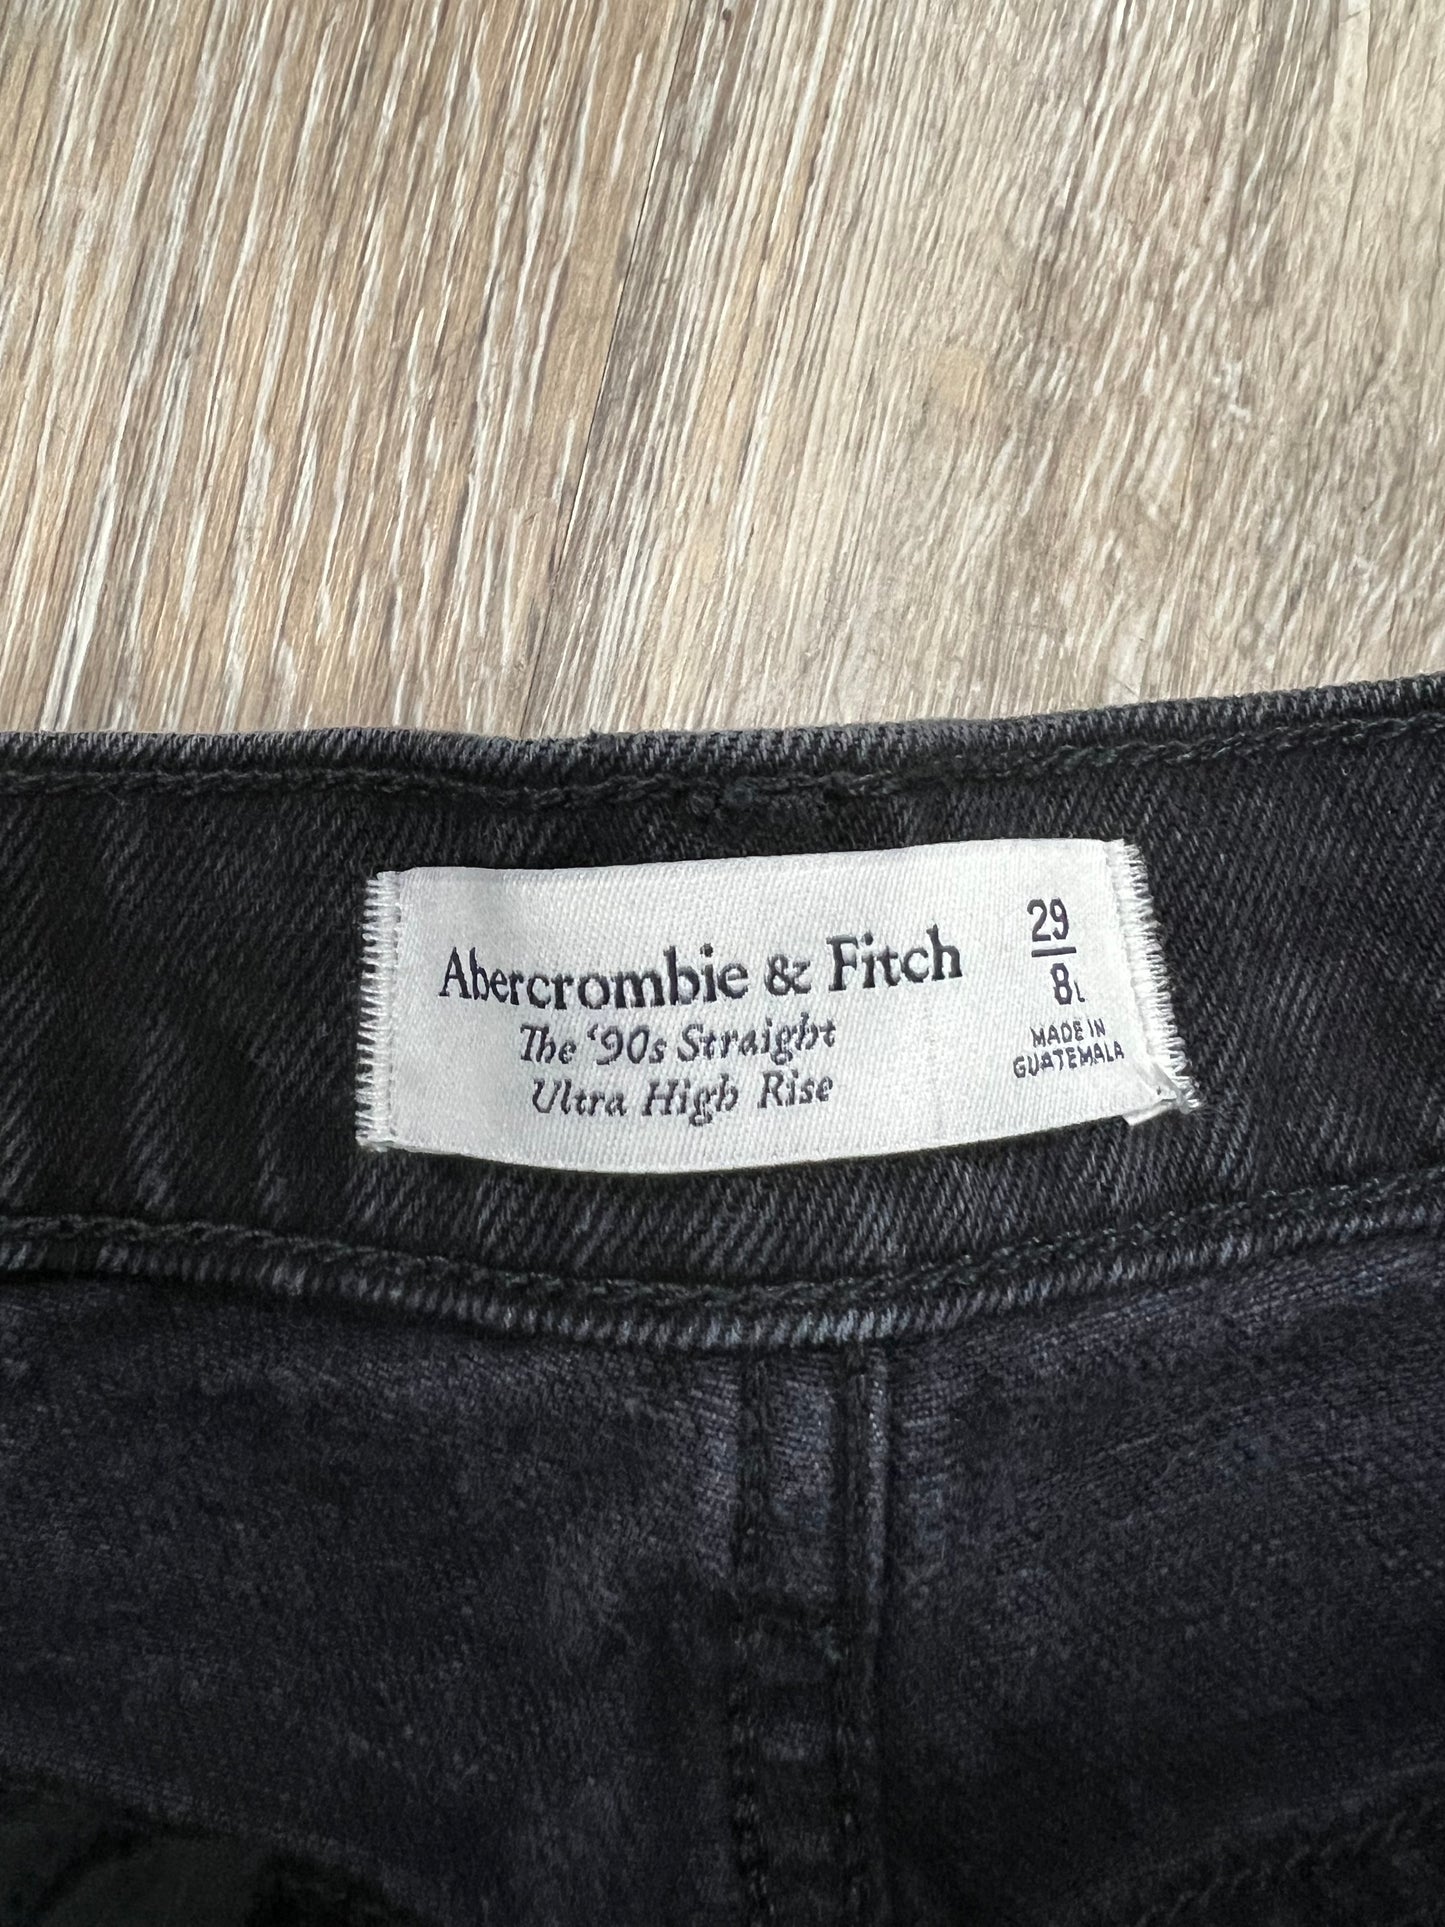 Shorts By Abercrombie And Fitch  Size: 8/29 L